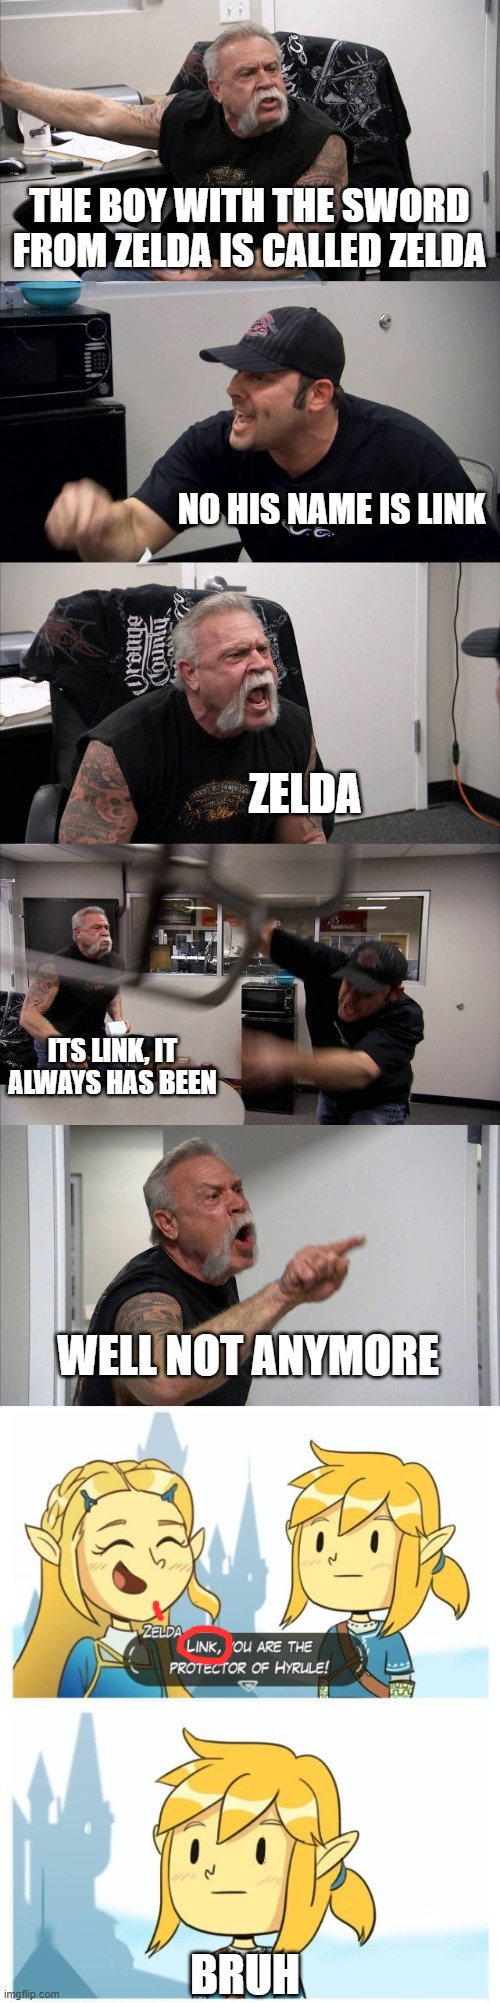 His name is link | THE BOY WITH THE SWORD FROM ZELDA IS CALLED ZELDA; NO HIS NAME IS LINK; ZELDA; ITS LINK, IT ALWAYS HAS BEEN; WELL NOT ANYMORE; BRUH | image tagged in memes,american chopper argument | made w/ Imgflip meme maker